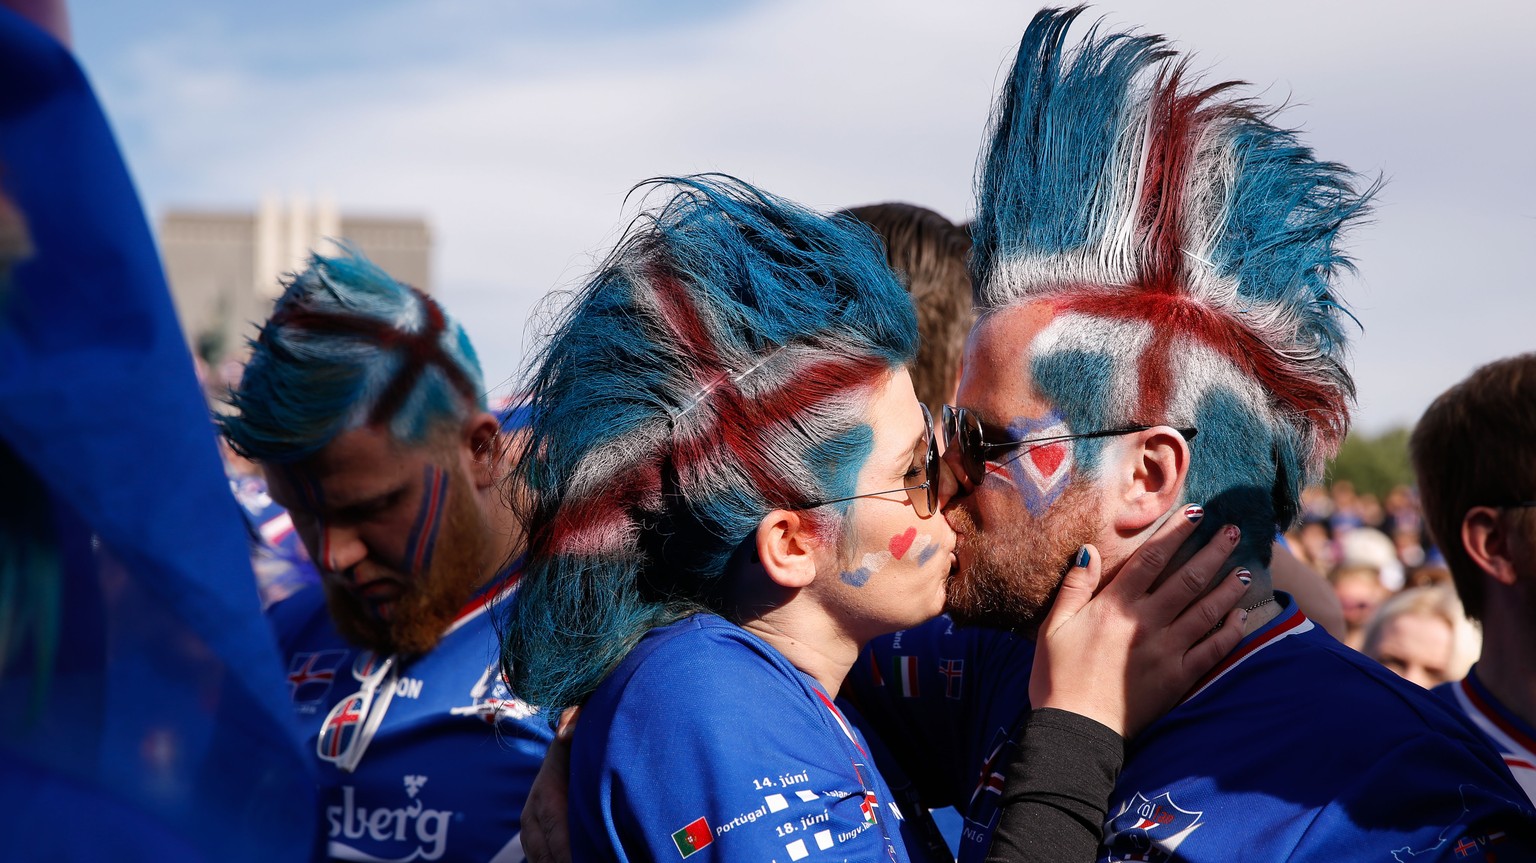 Iceland soccer fans kiss prior to watching the Euro 2016 quarterfinal match between Iceland and France on a large screen in Reykjavik, Iceland, Sunday July 3, 2016. (AP Photo/Brynjar Gunnarsson)